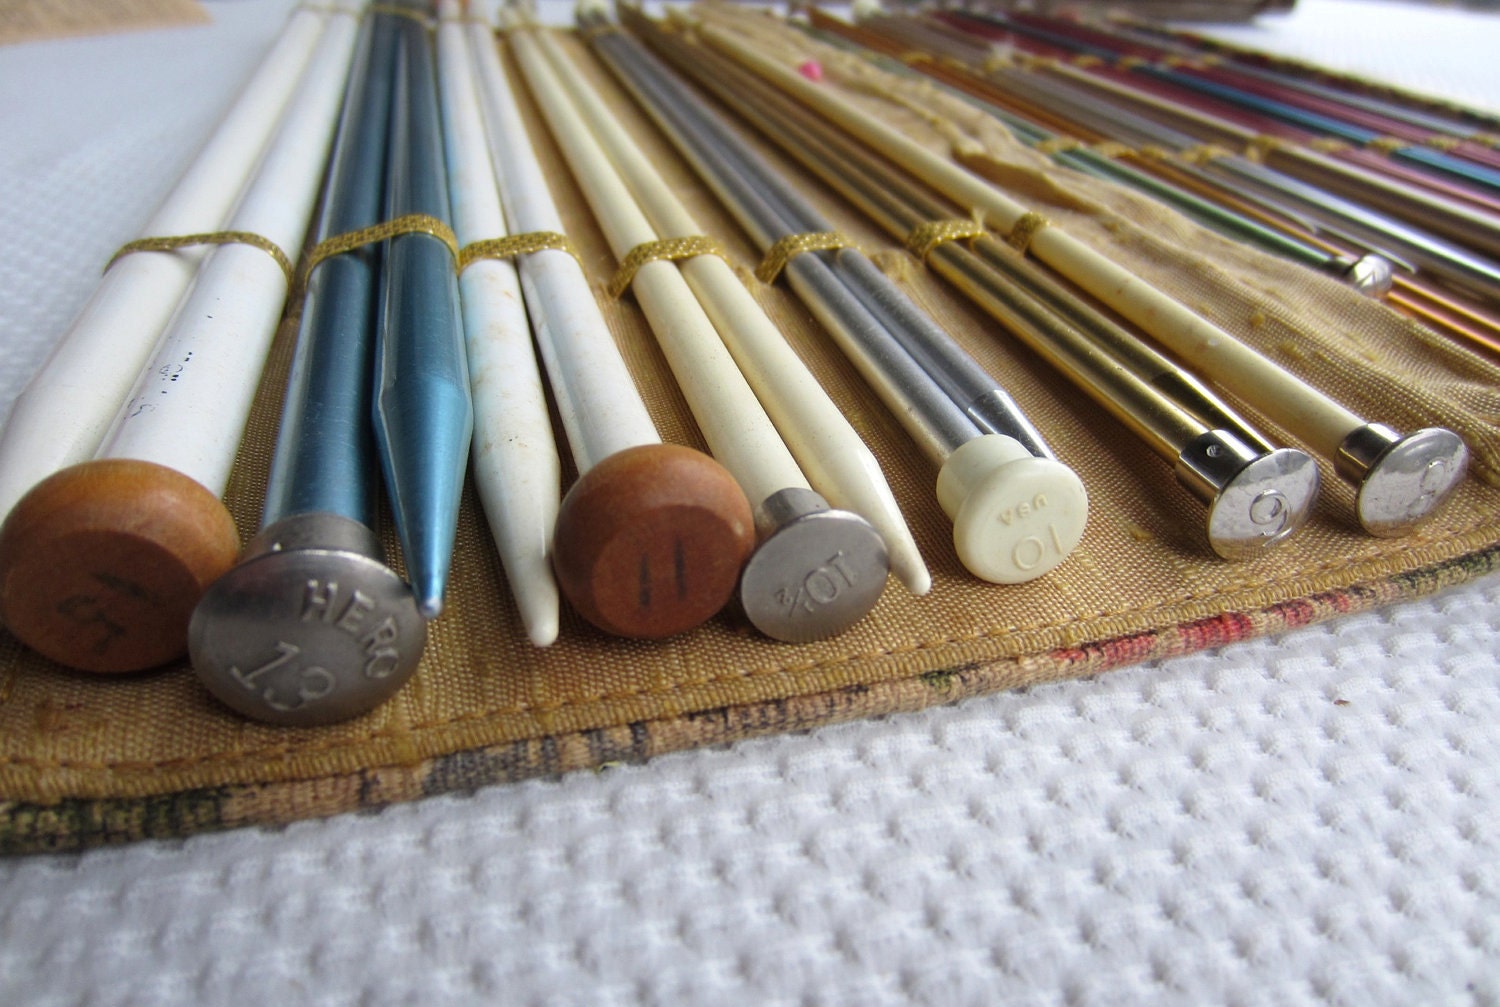 Vintage Susan Bates Knitting Needles with Tapestry Style Case